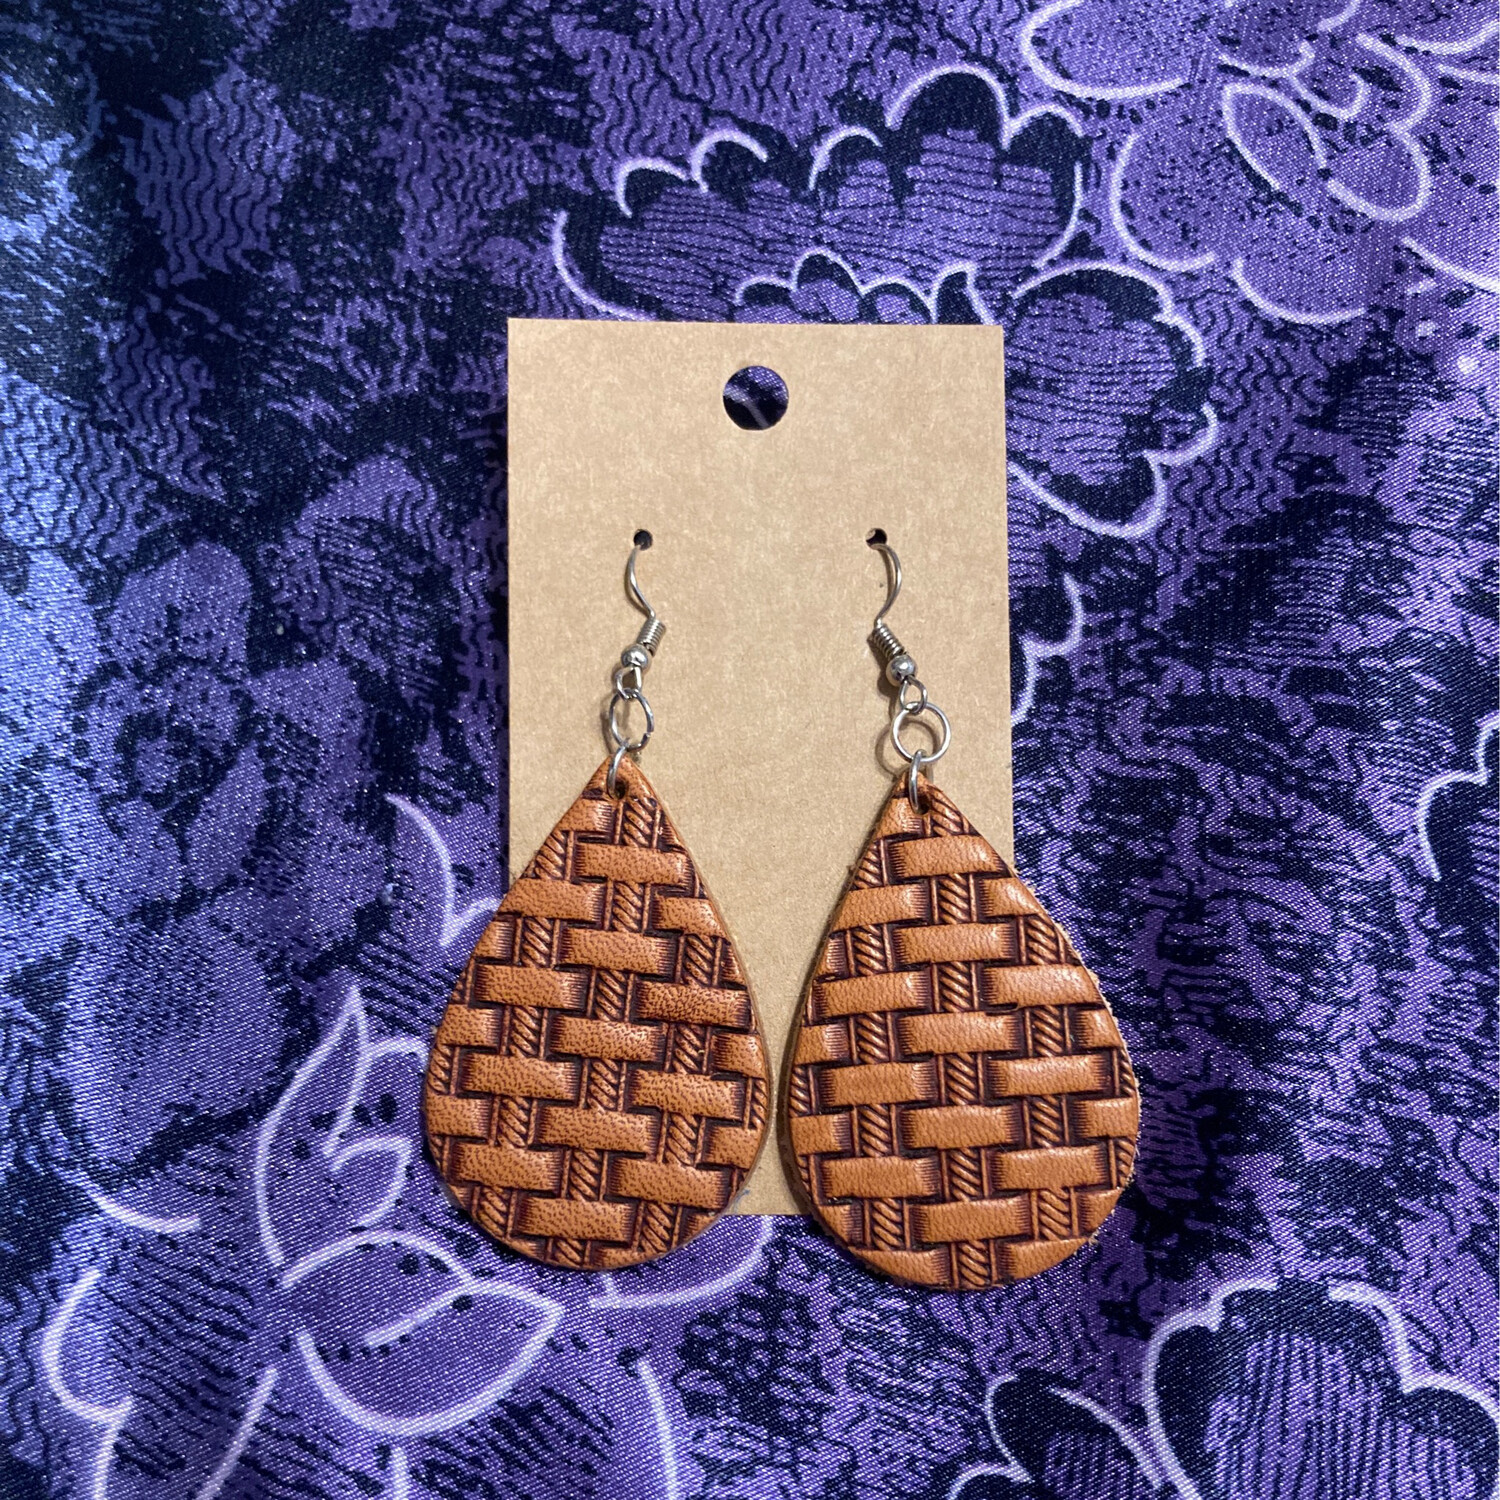 Stamped Leather Earrings